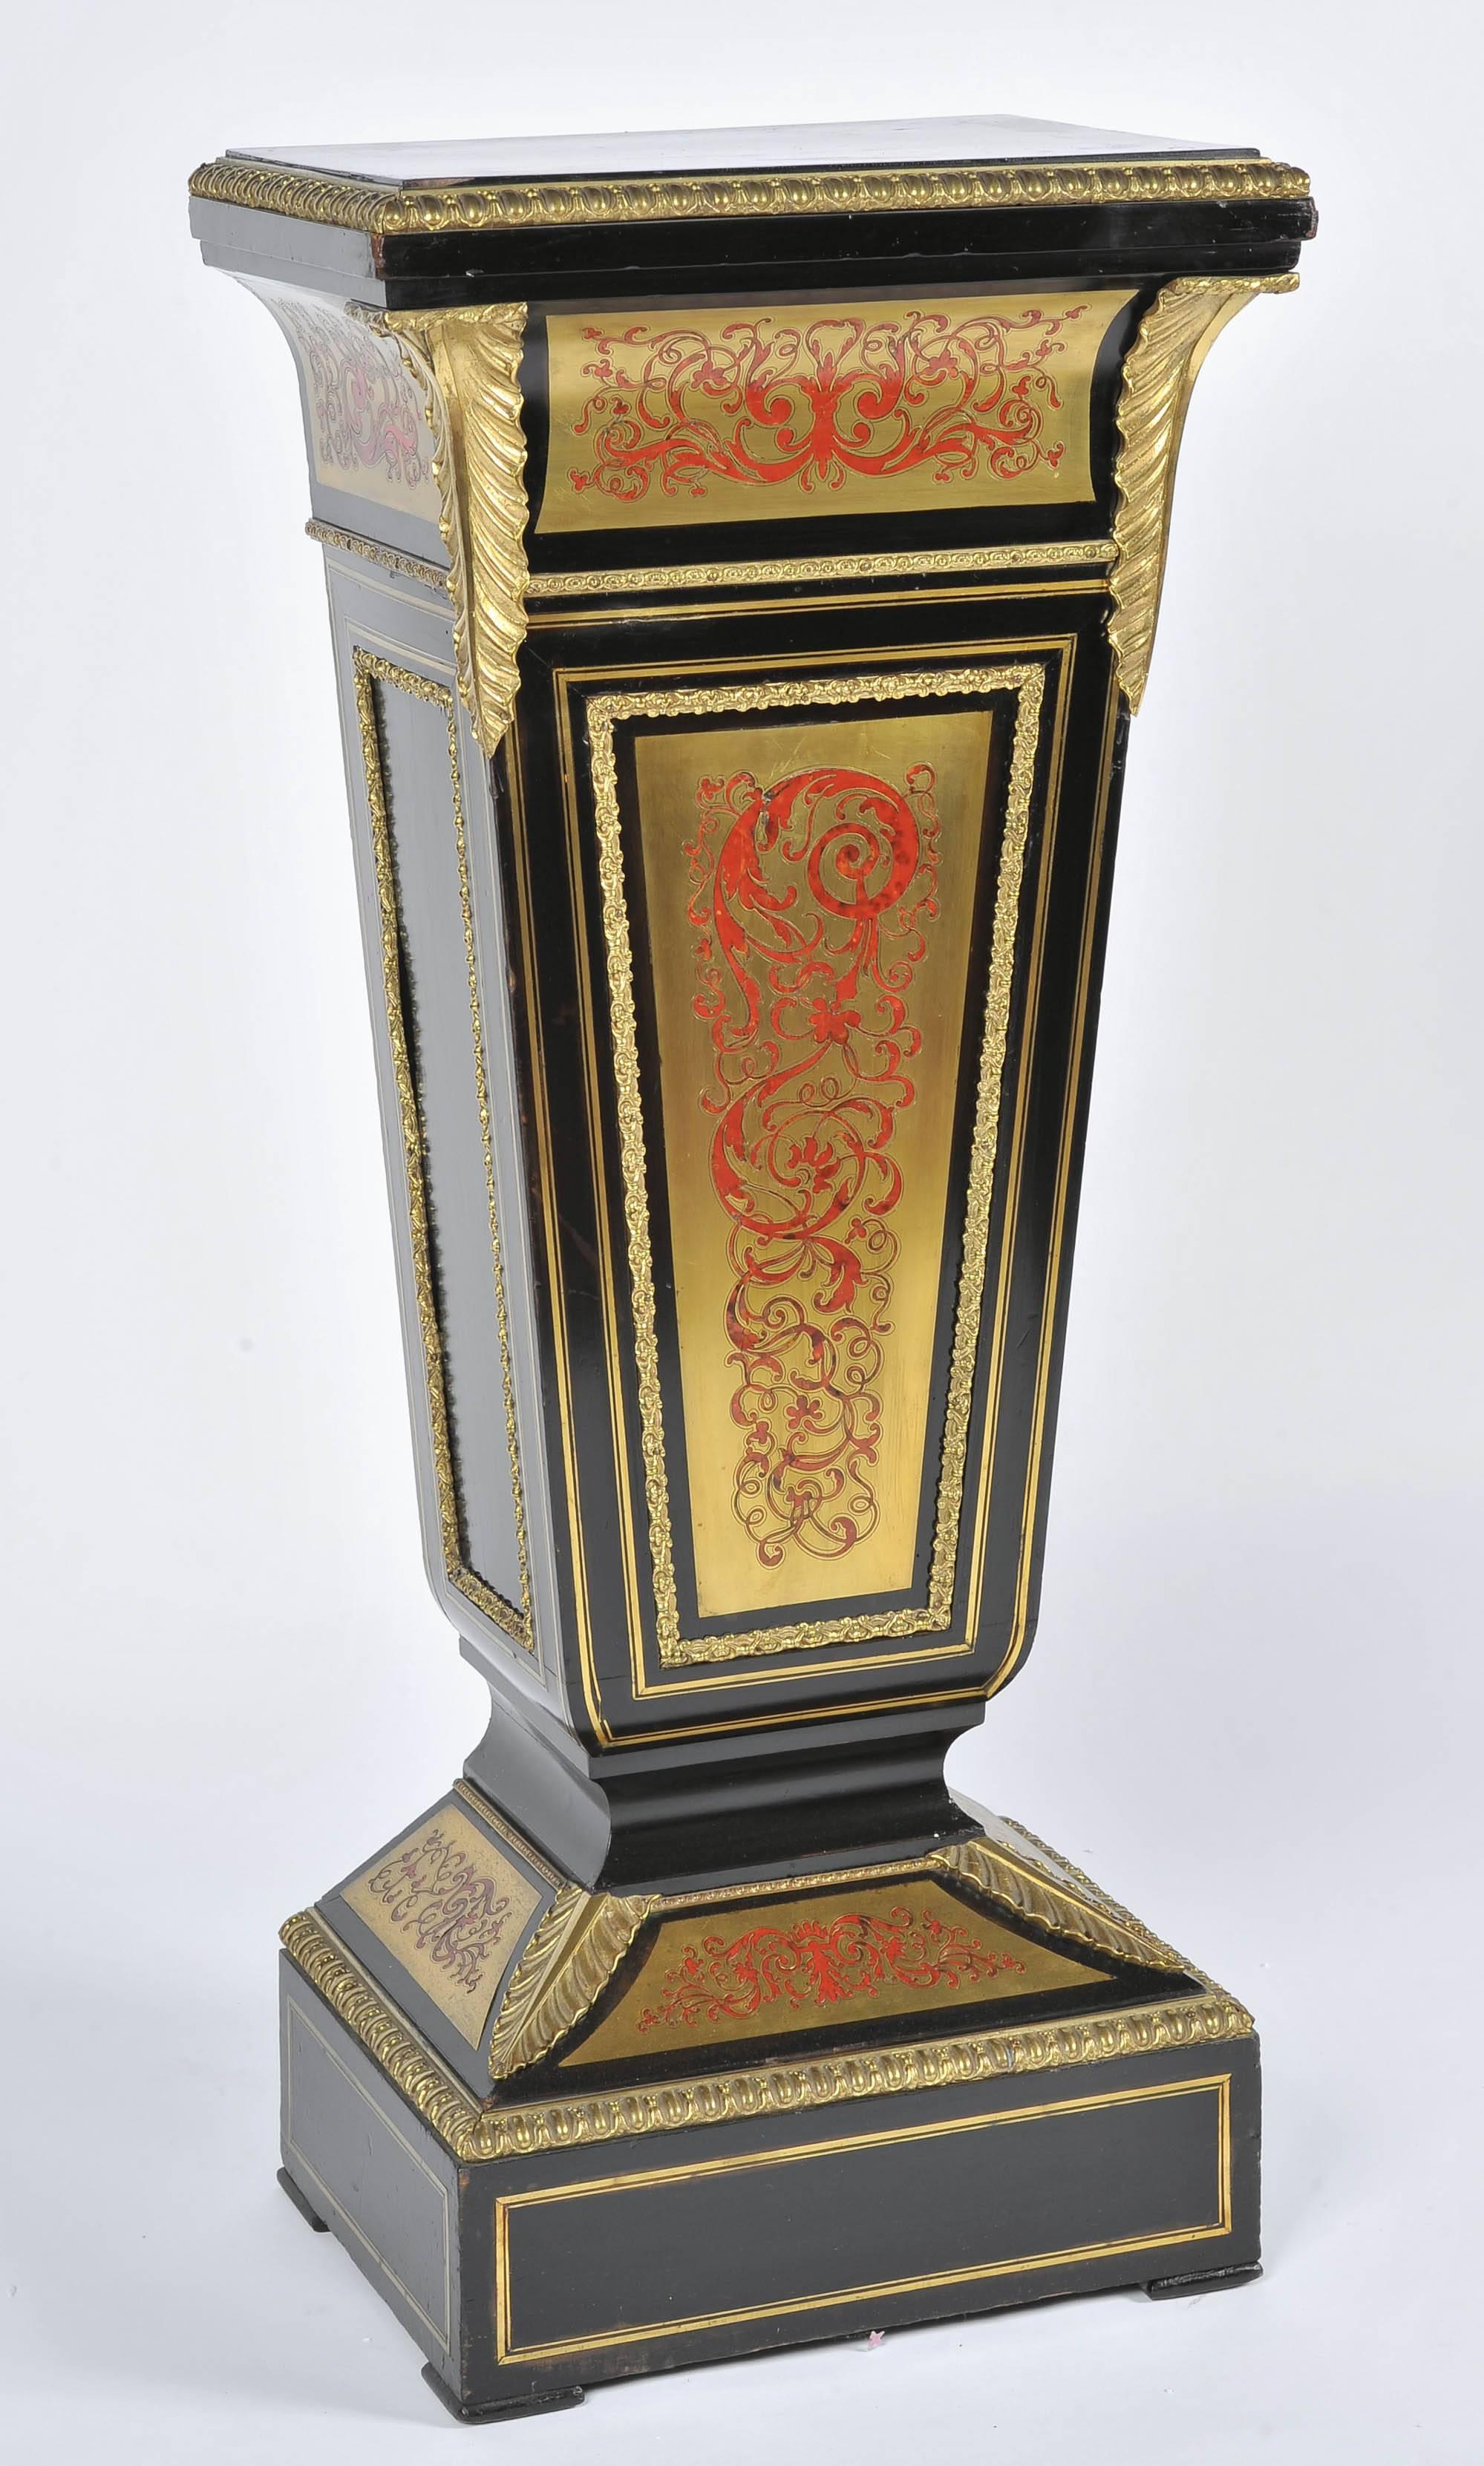 A good quality pair of 19th century French Ebonized, Boulle inlaid, ormolu-mounted pedestals.